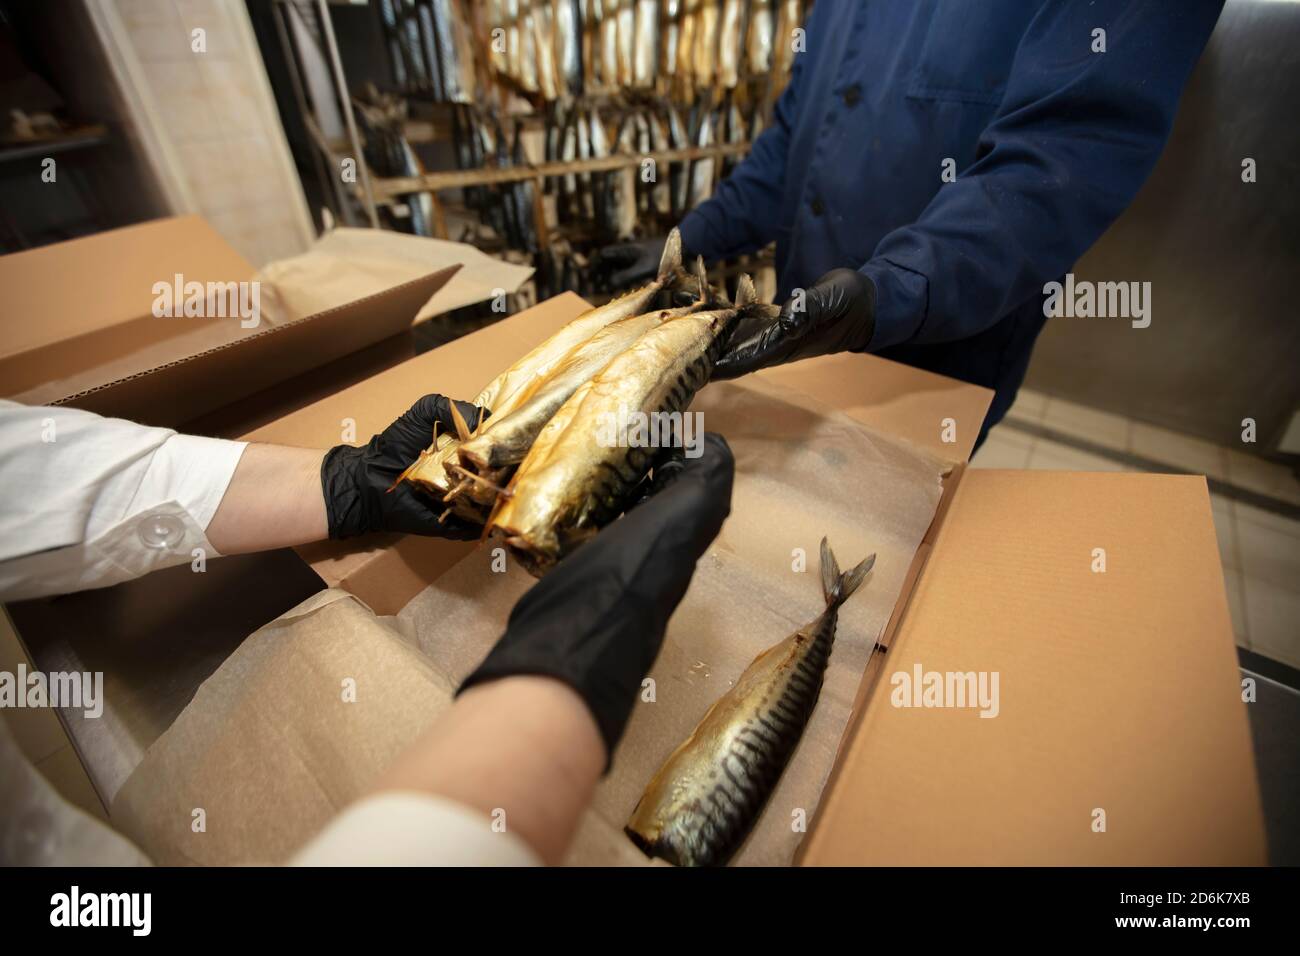 The hands of a worker put smoked fish in a paper box. Stock Photo